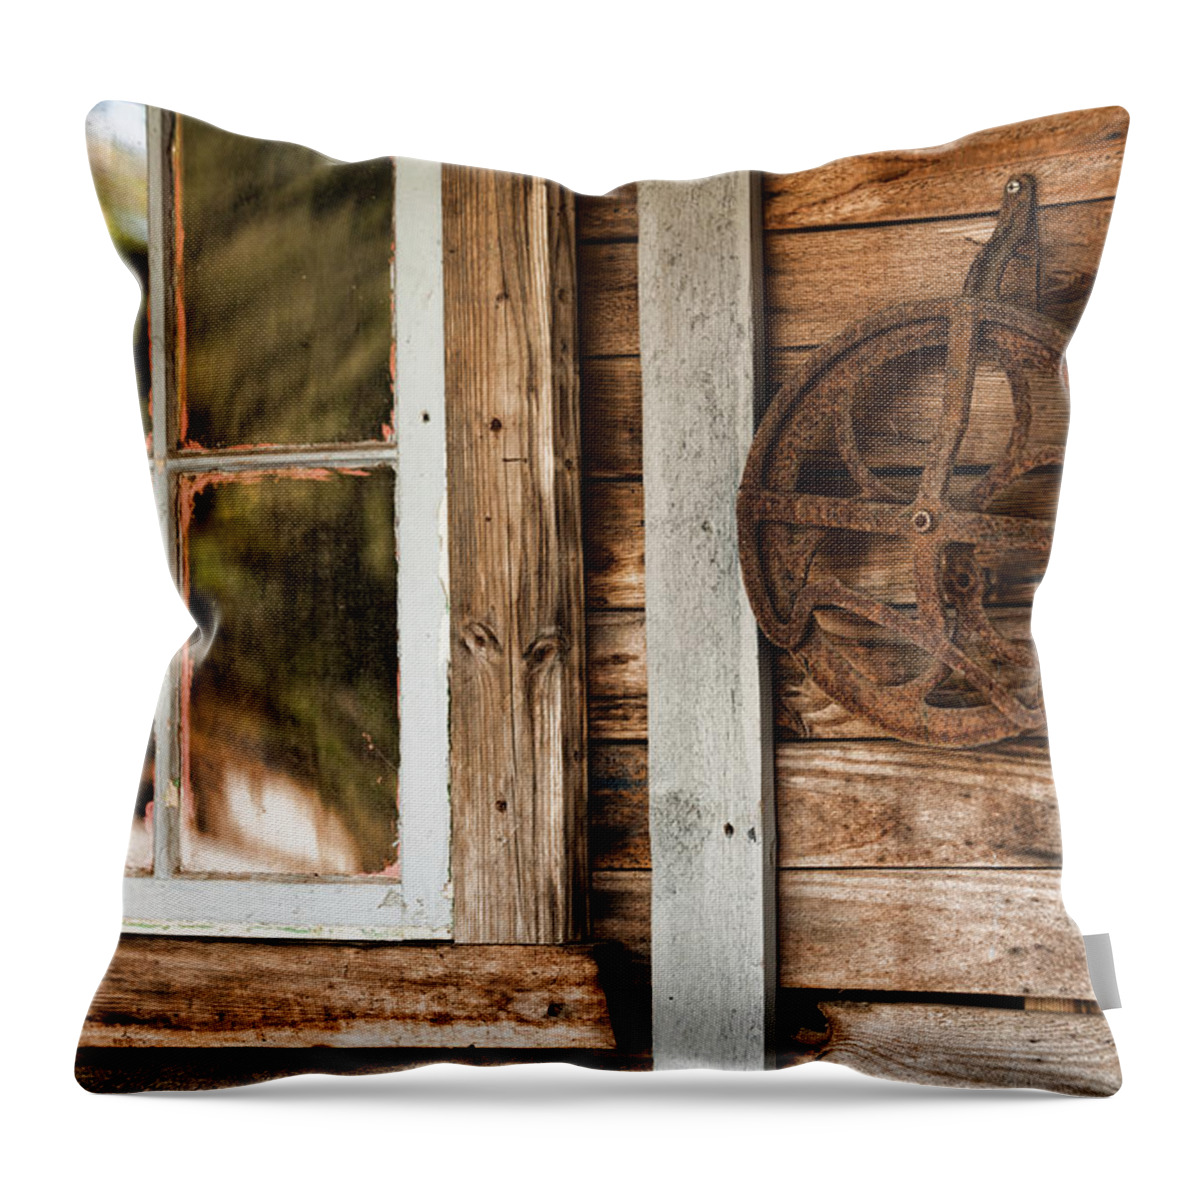 Deserted Homestead Throw Pillow featuring the photograph Deserted Homestead by Bonnie Bruno